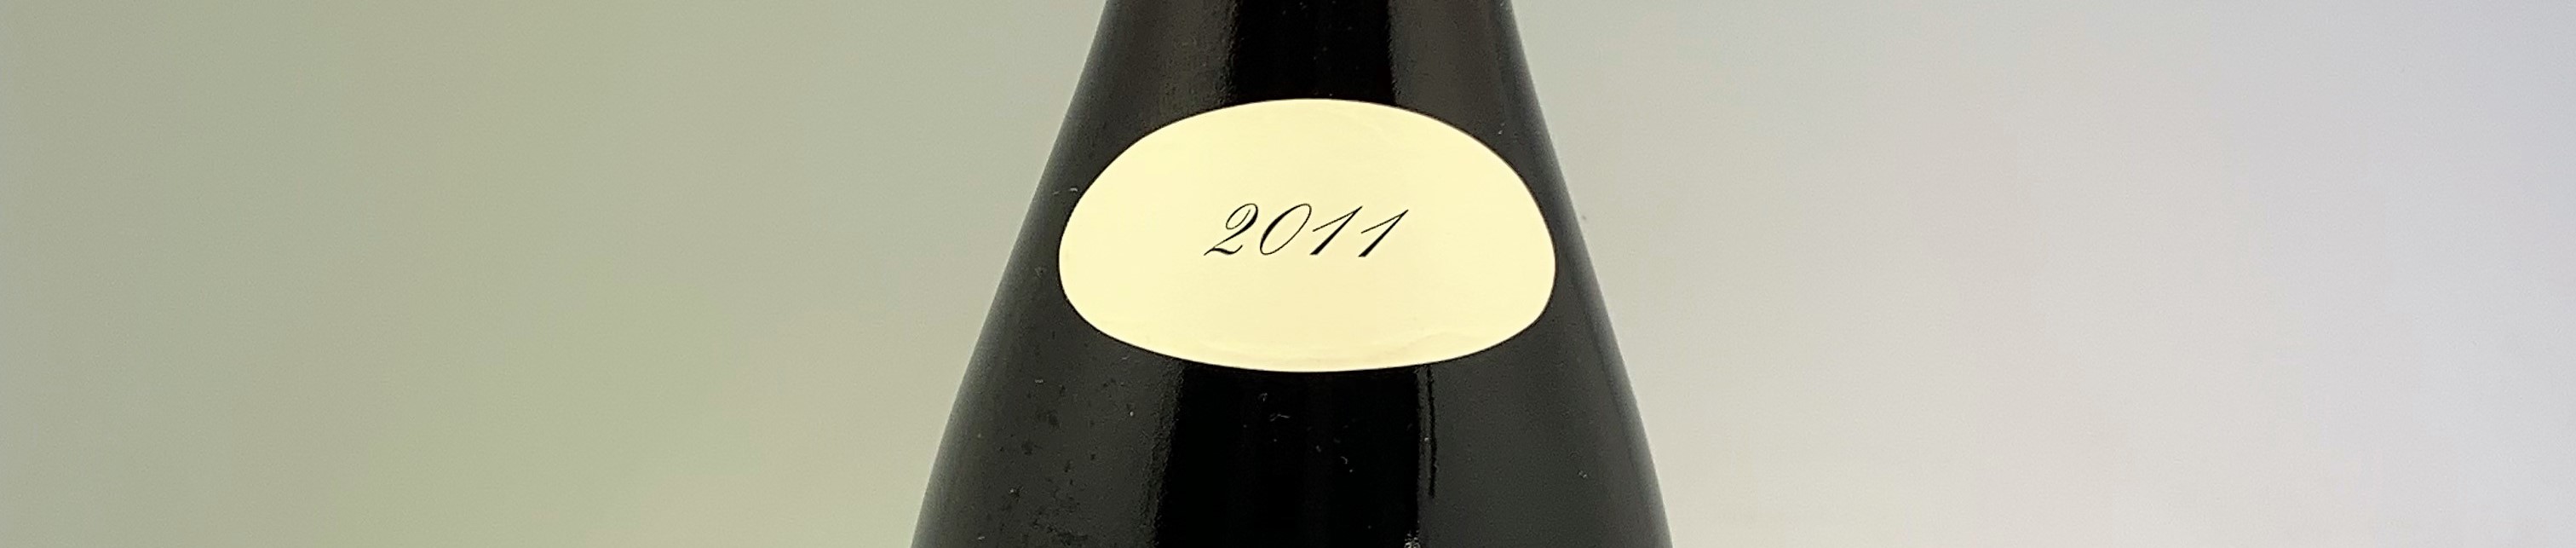 the picture shows a bottle of the 2011 vintage